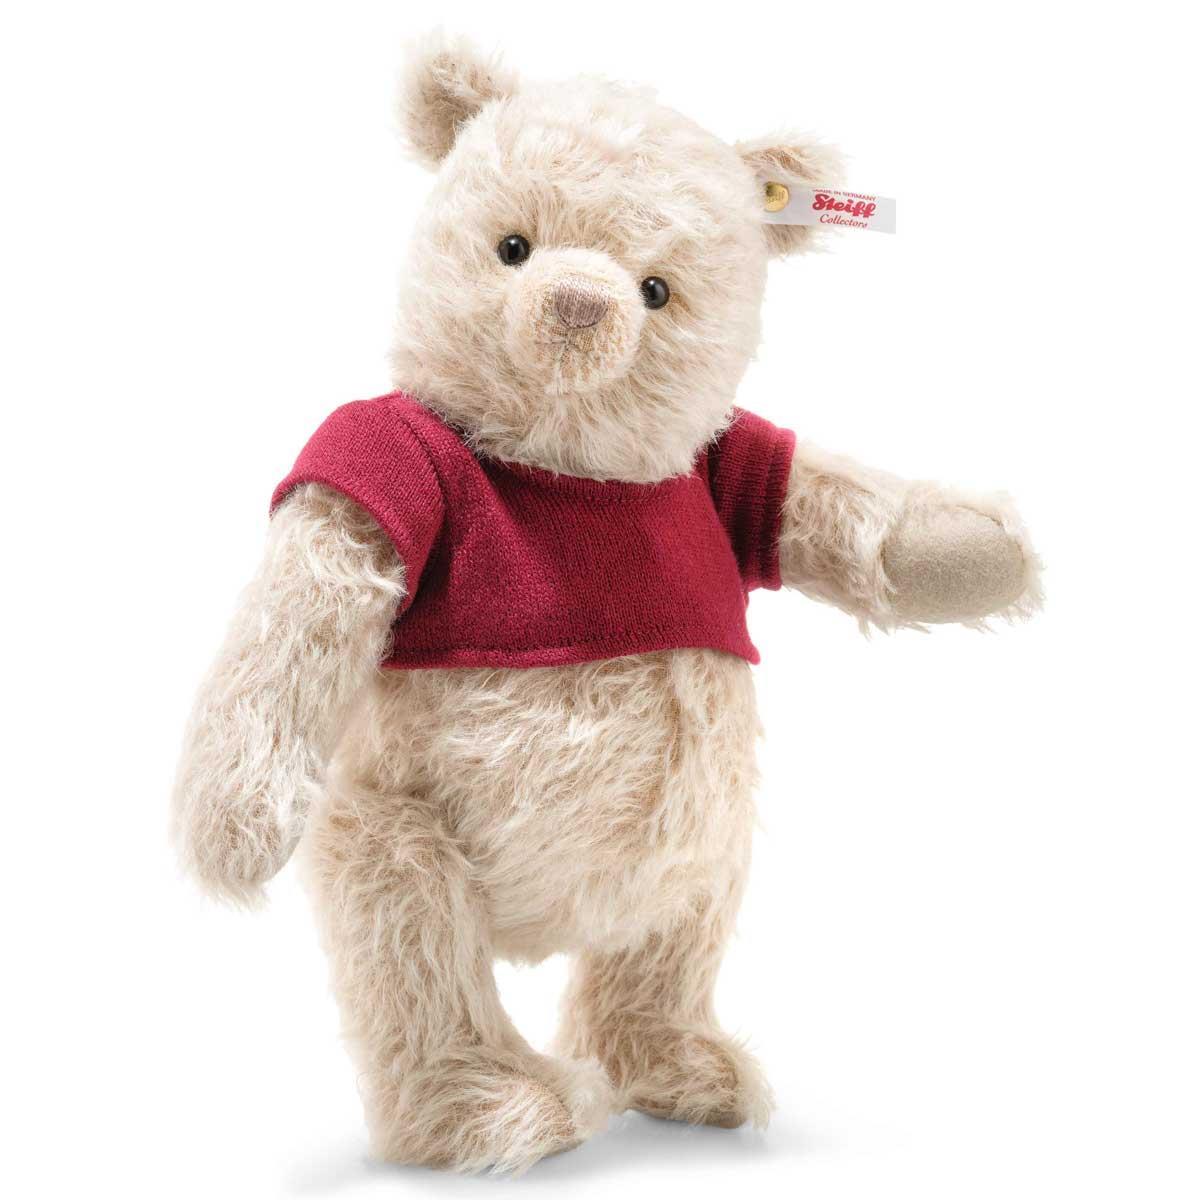 Steiff Limited Edition Christopher Robin Winnie the Pooh